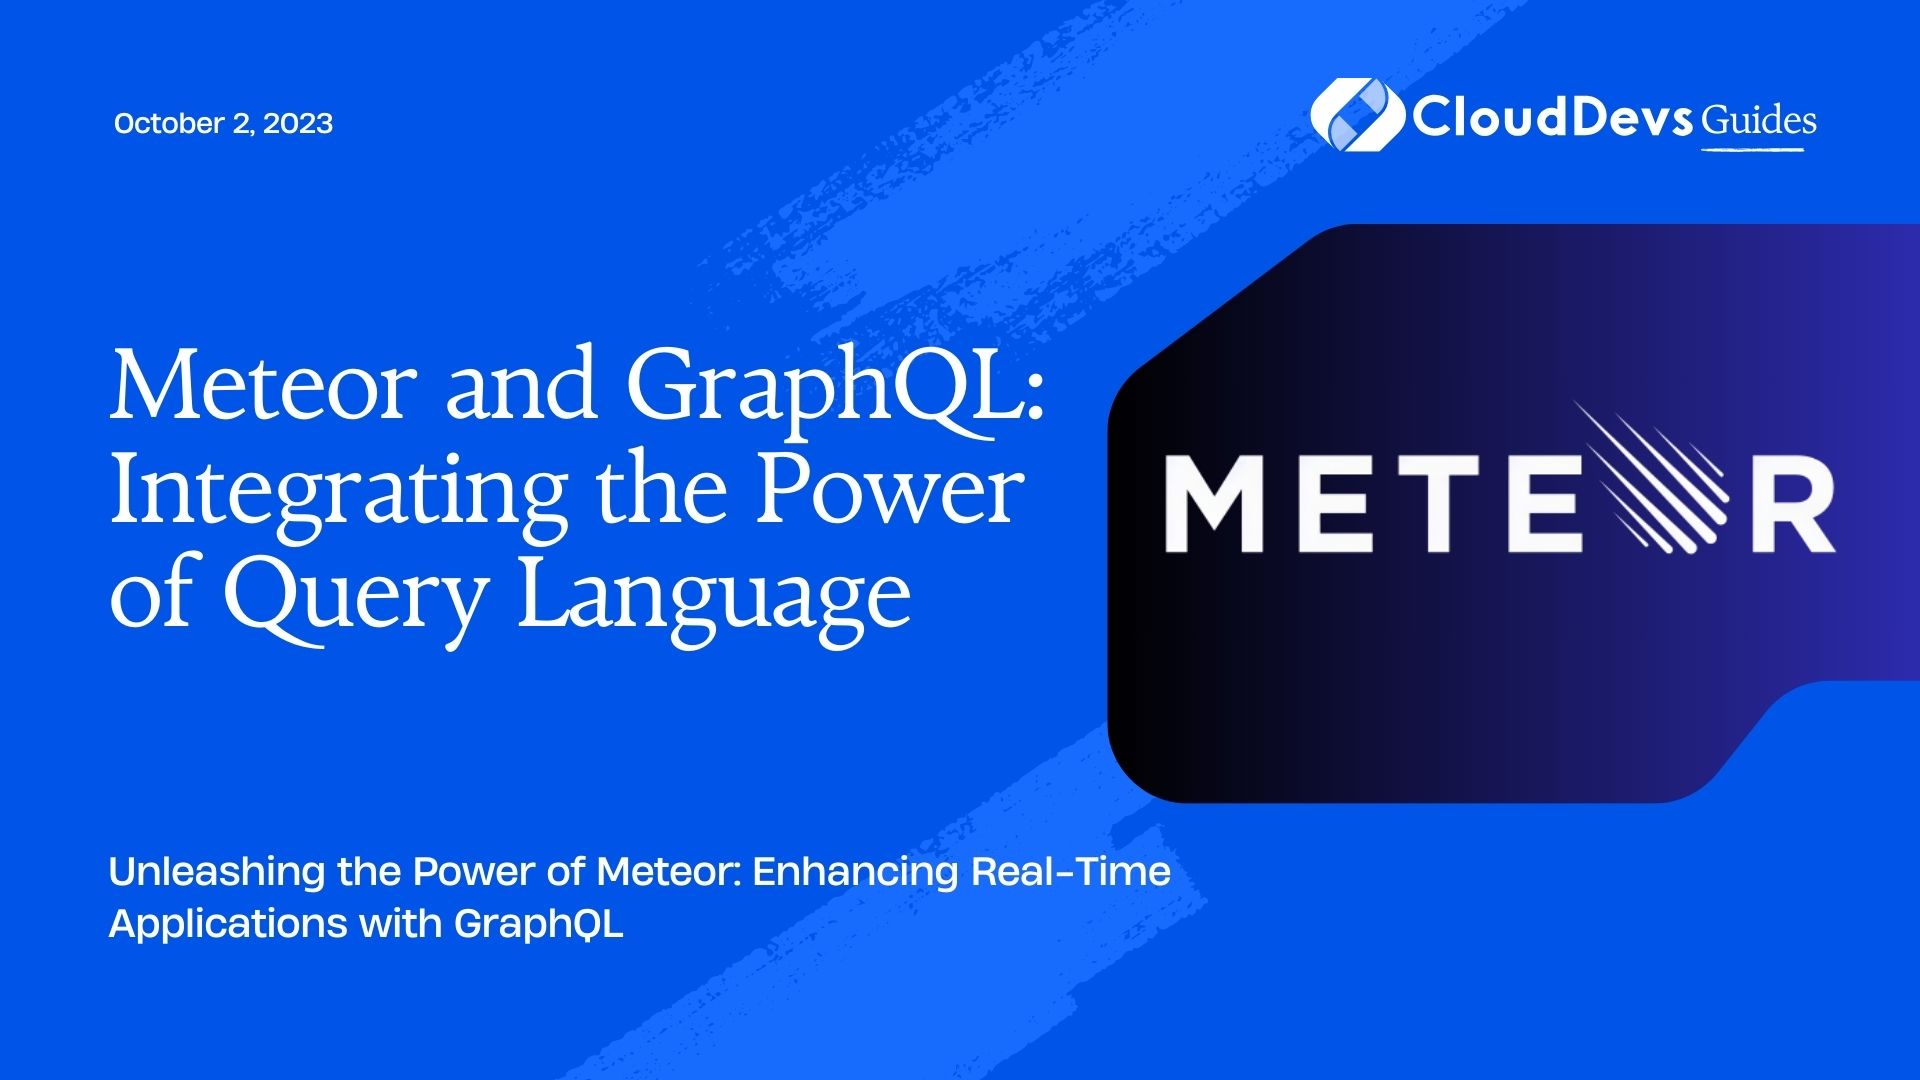 Meteor and GraphQL: Integrating the Power of Query Language